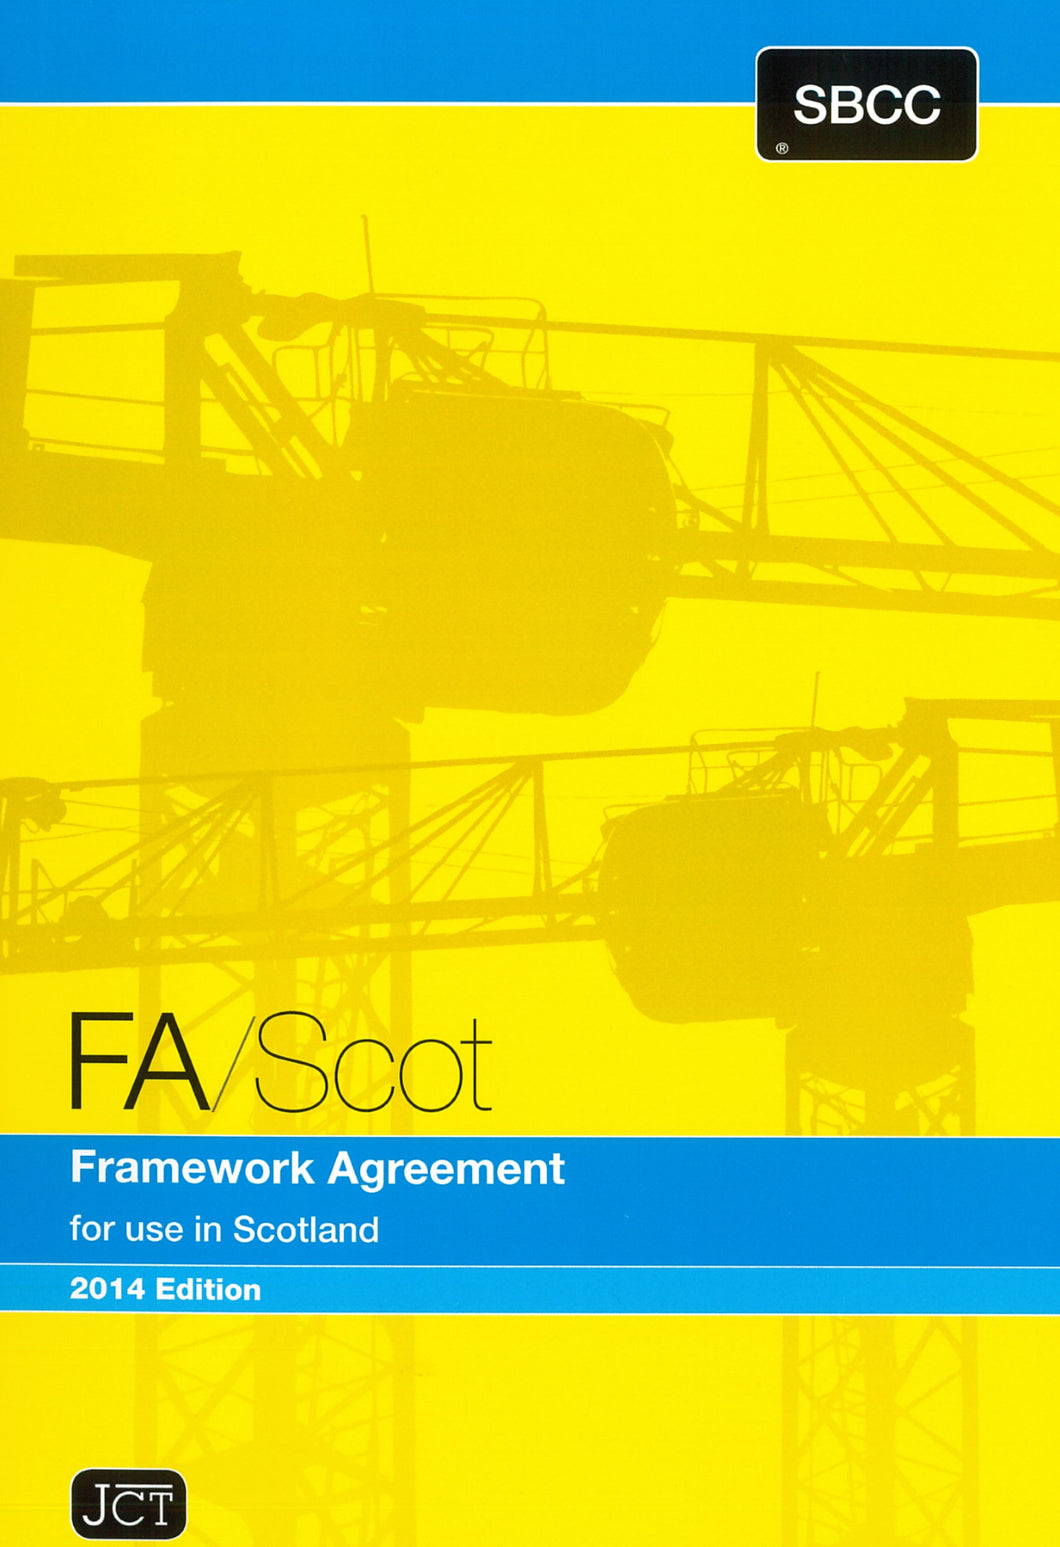 Framework Agreement for Use in Scotland 2014 Edition